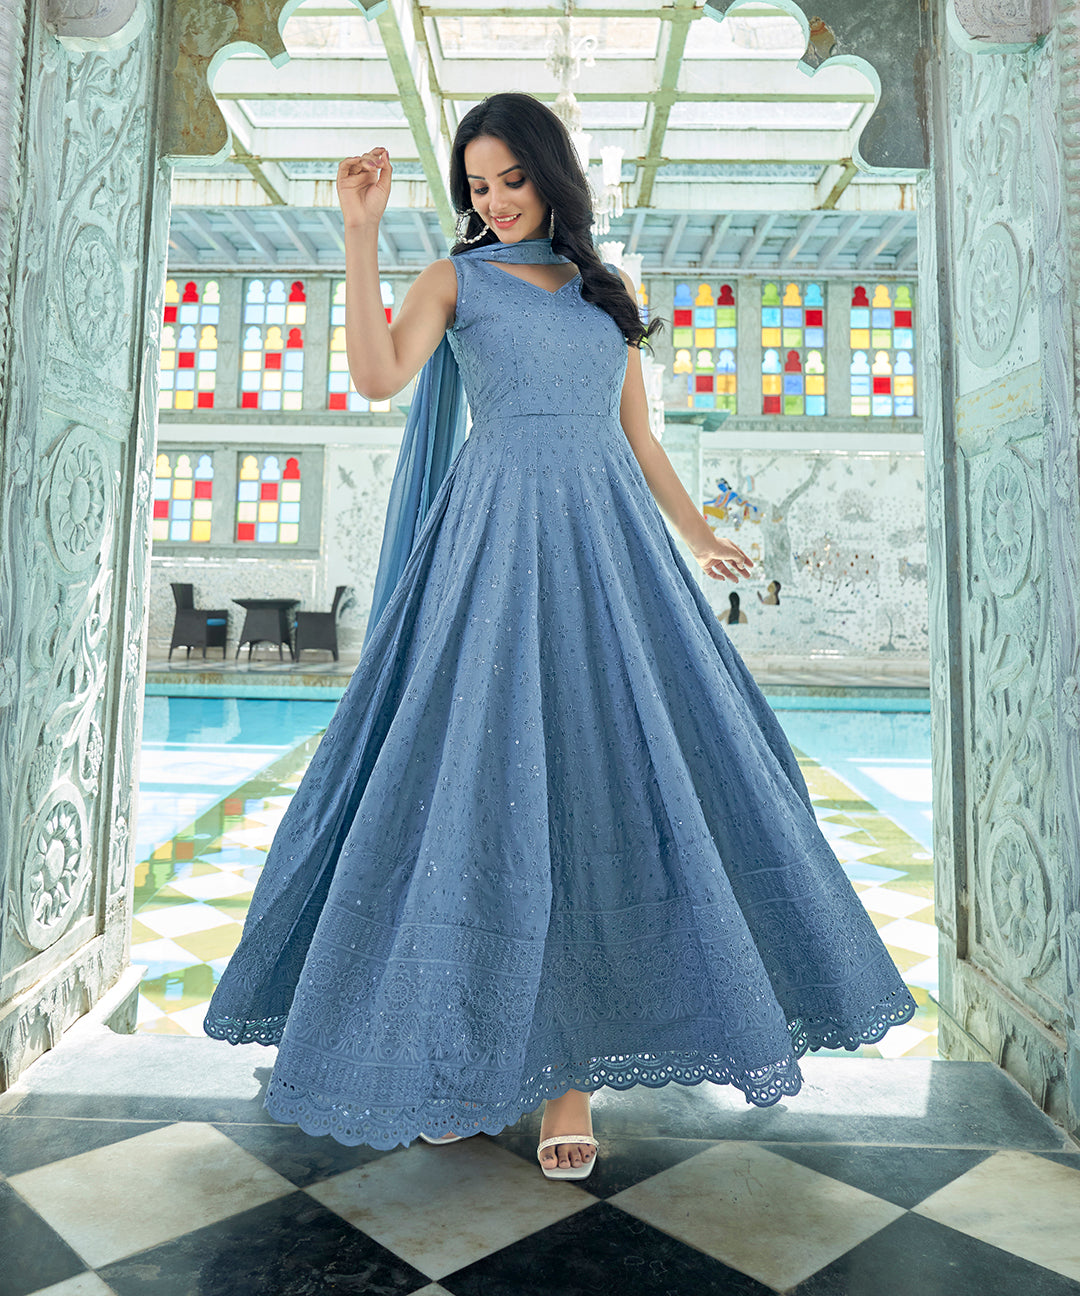 A serene Soothing Blue Rayon Dress with Dupatta, offering comfort and style with its soft fabric and elegant design.